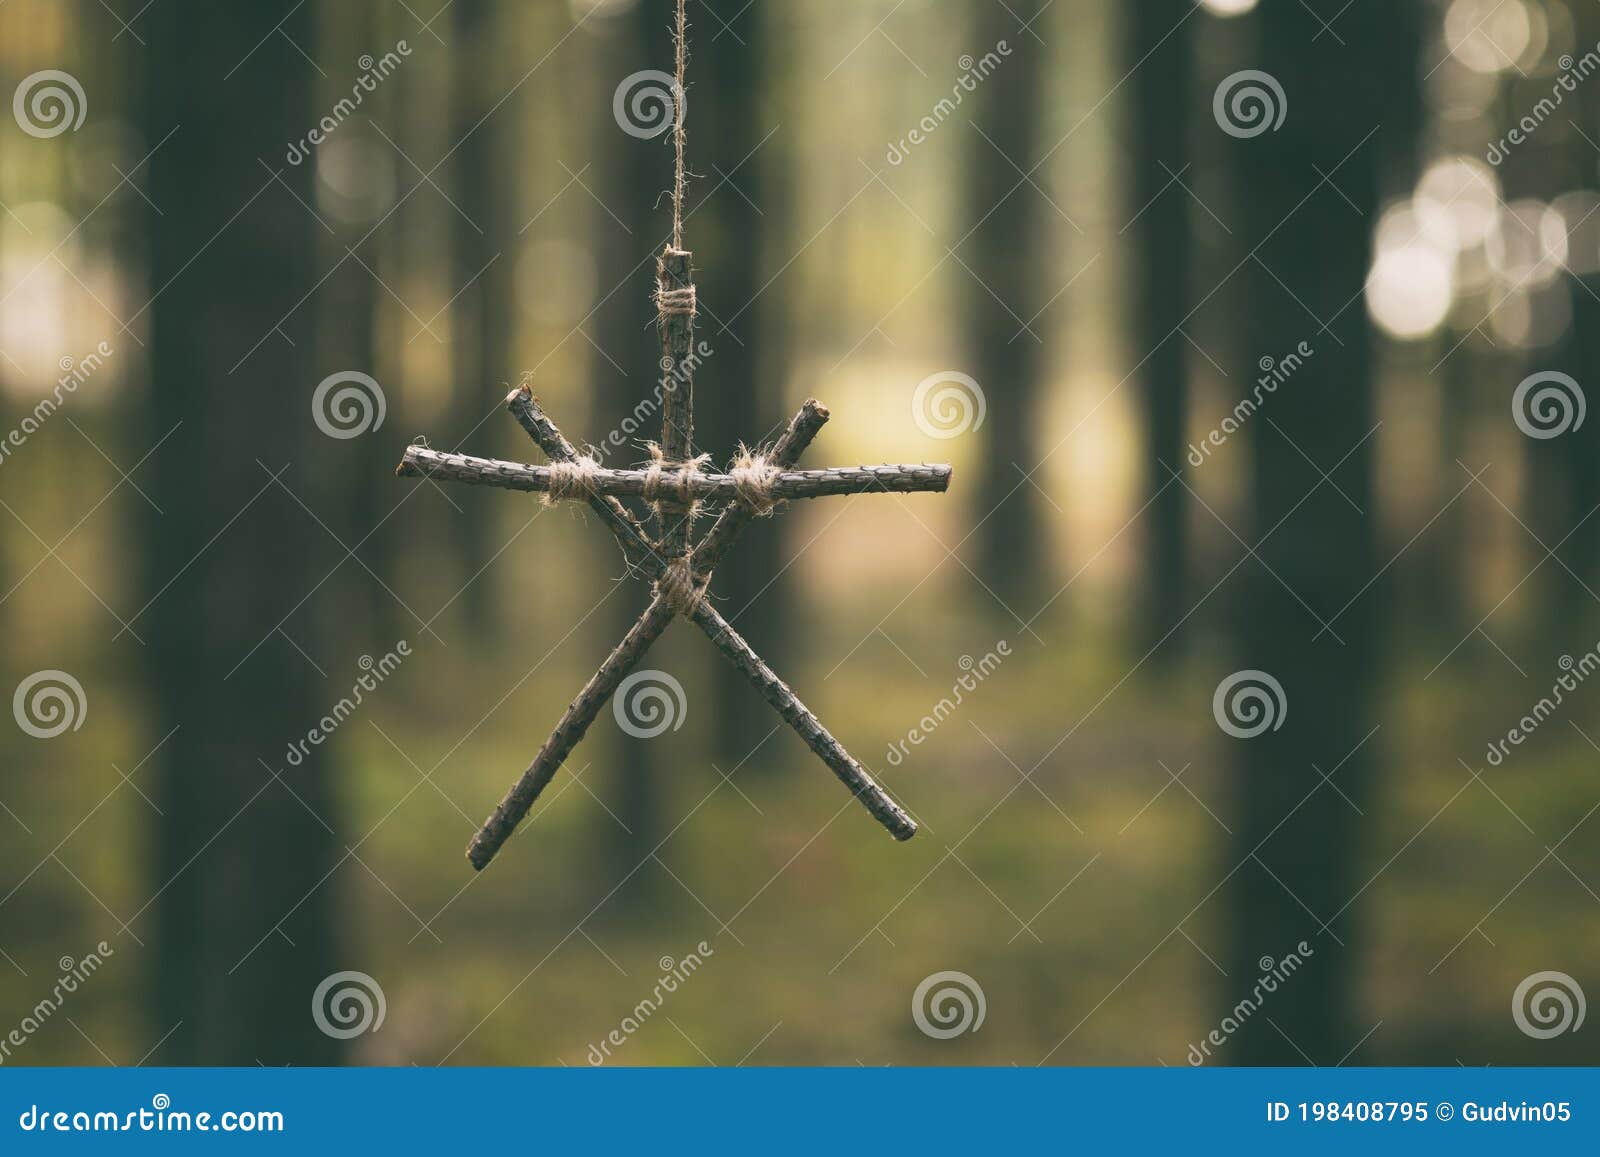 witchcraft sticks . magic occult . totem hanging on tree in dark forest.